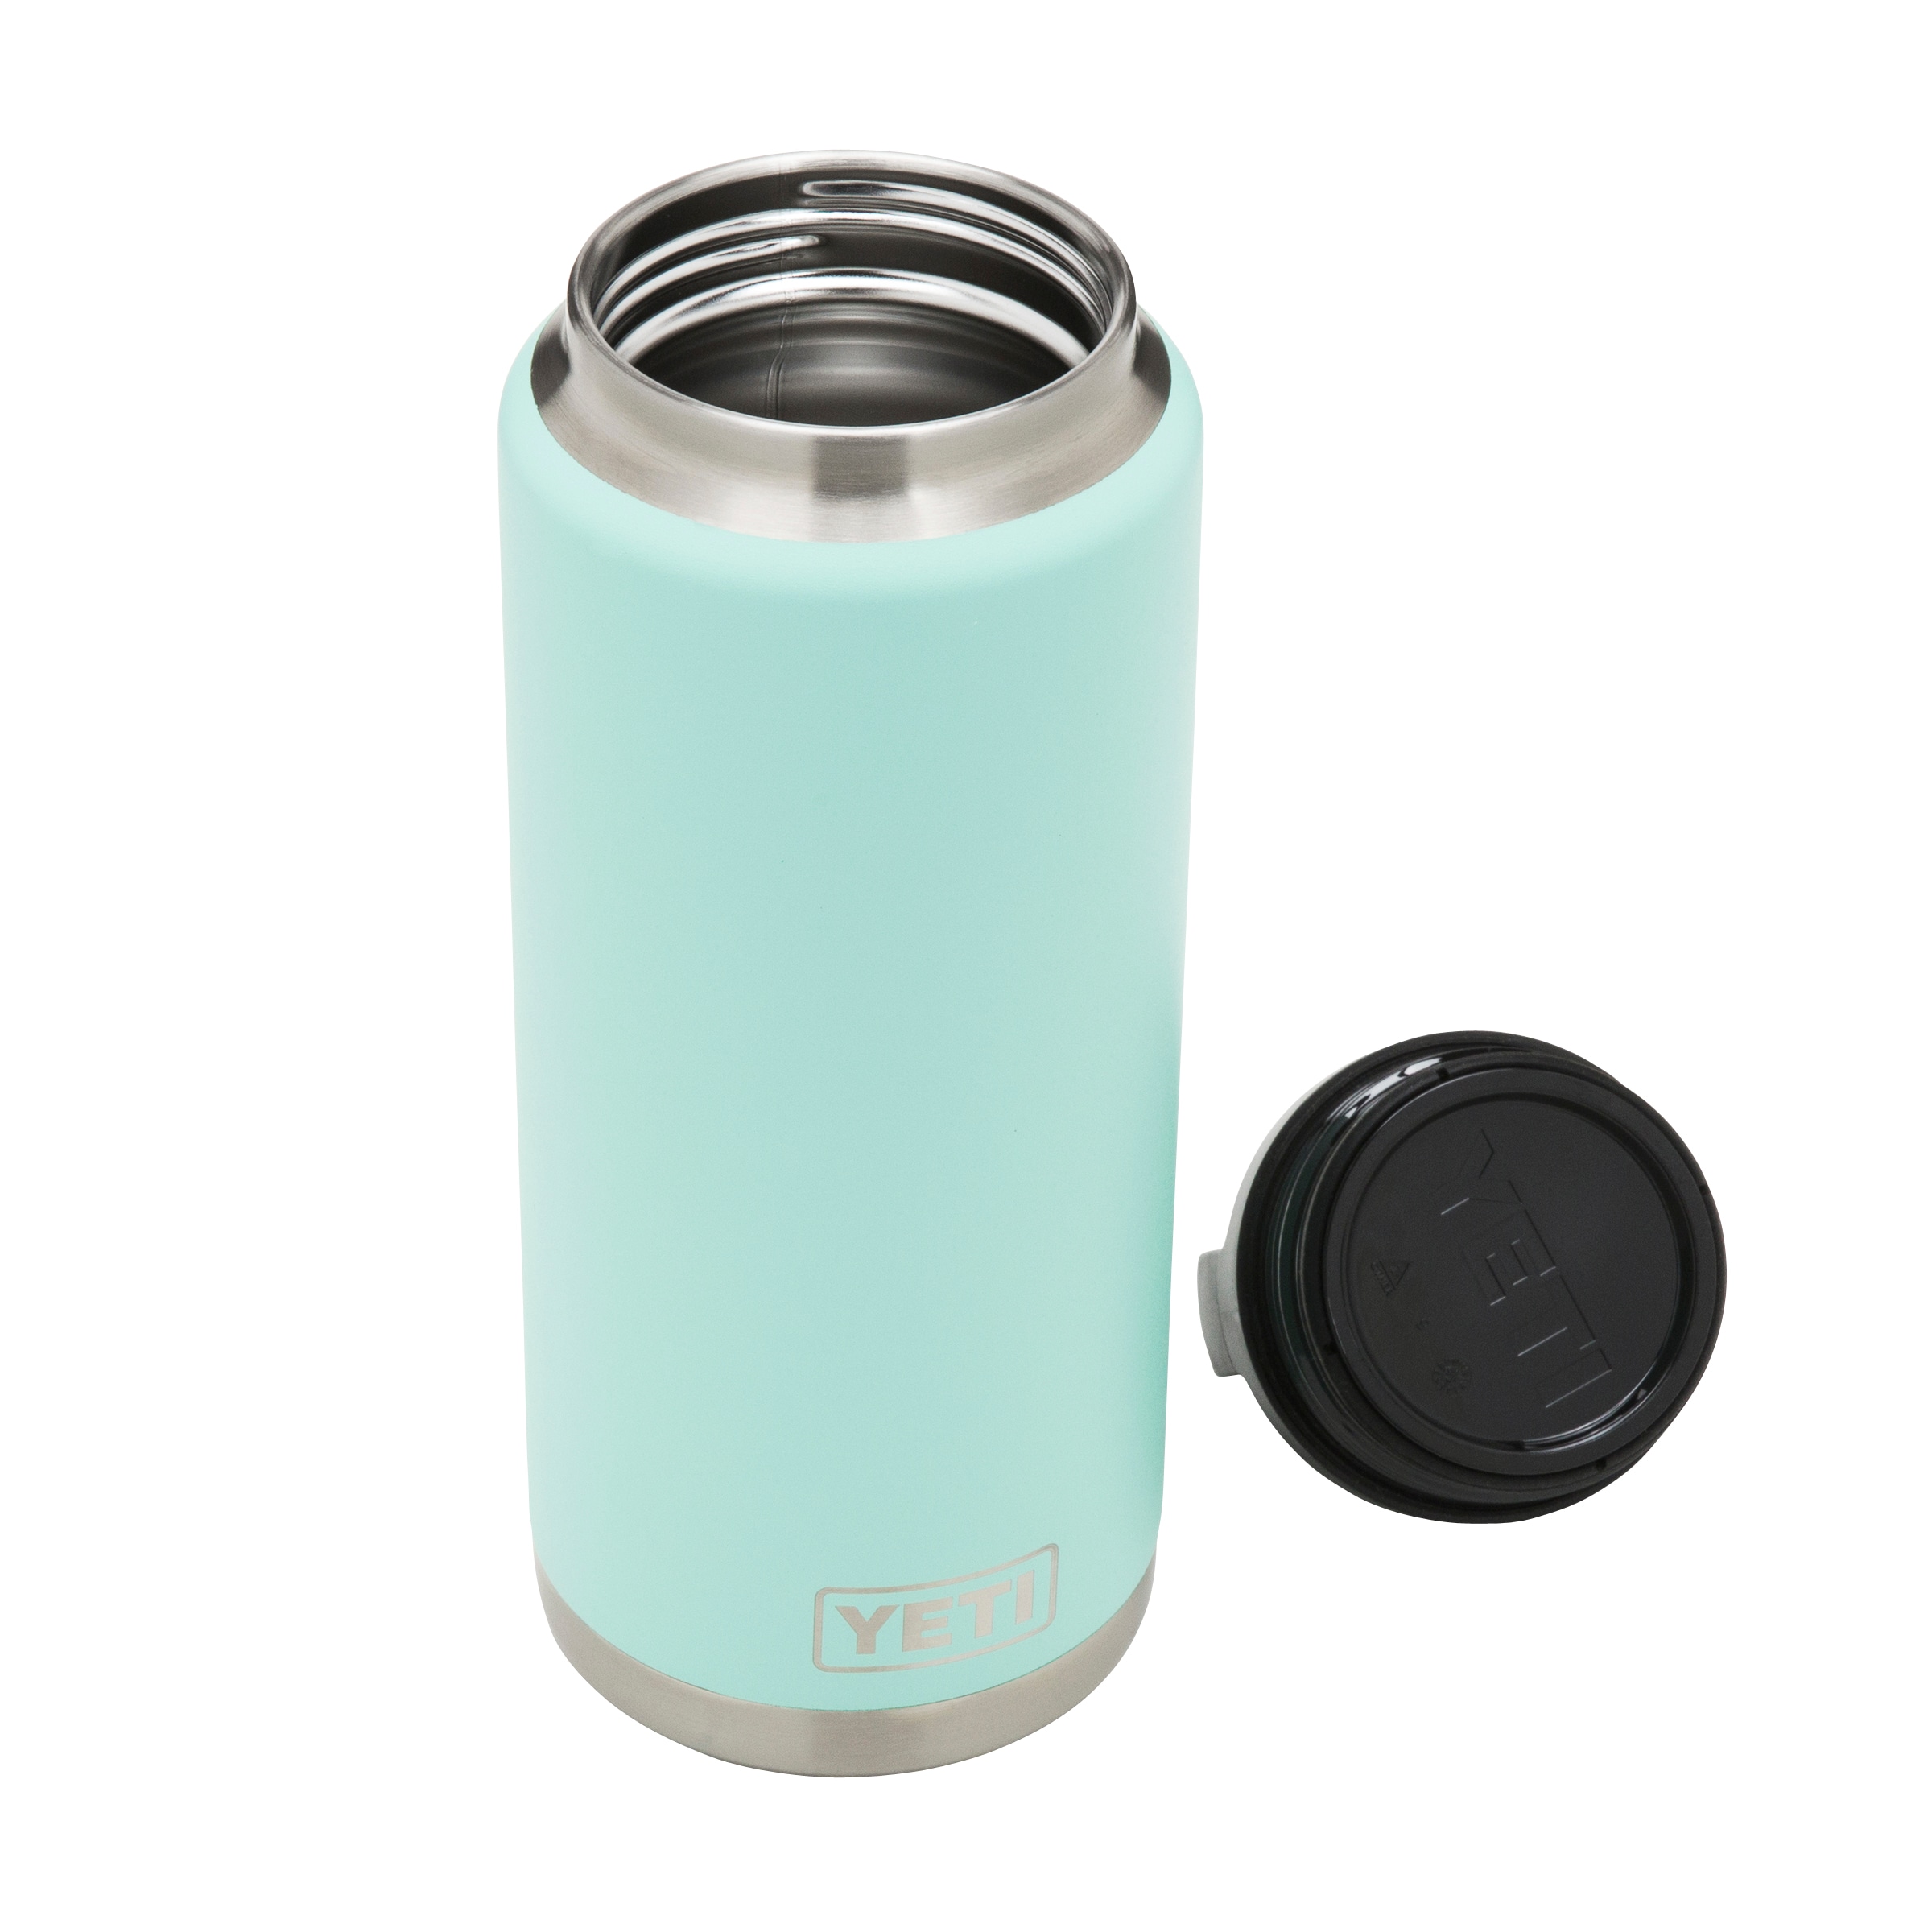 Yeti Rambler 36 oz Bottle Sand Retired Color With Strong Hold Lid